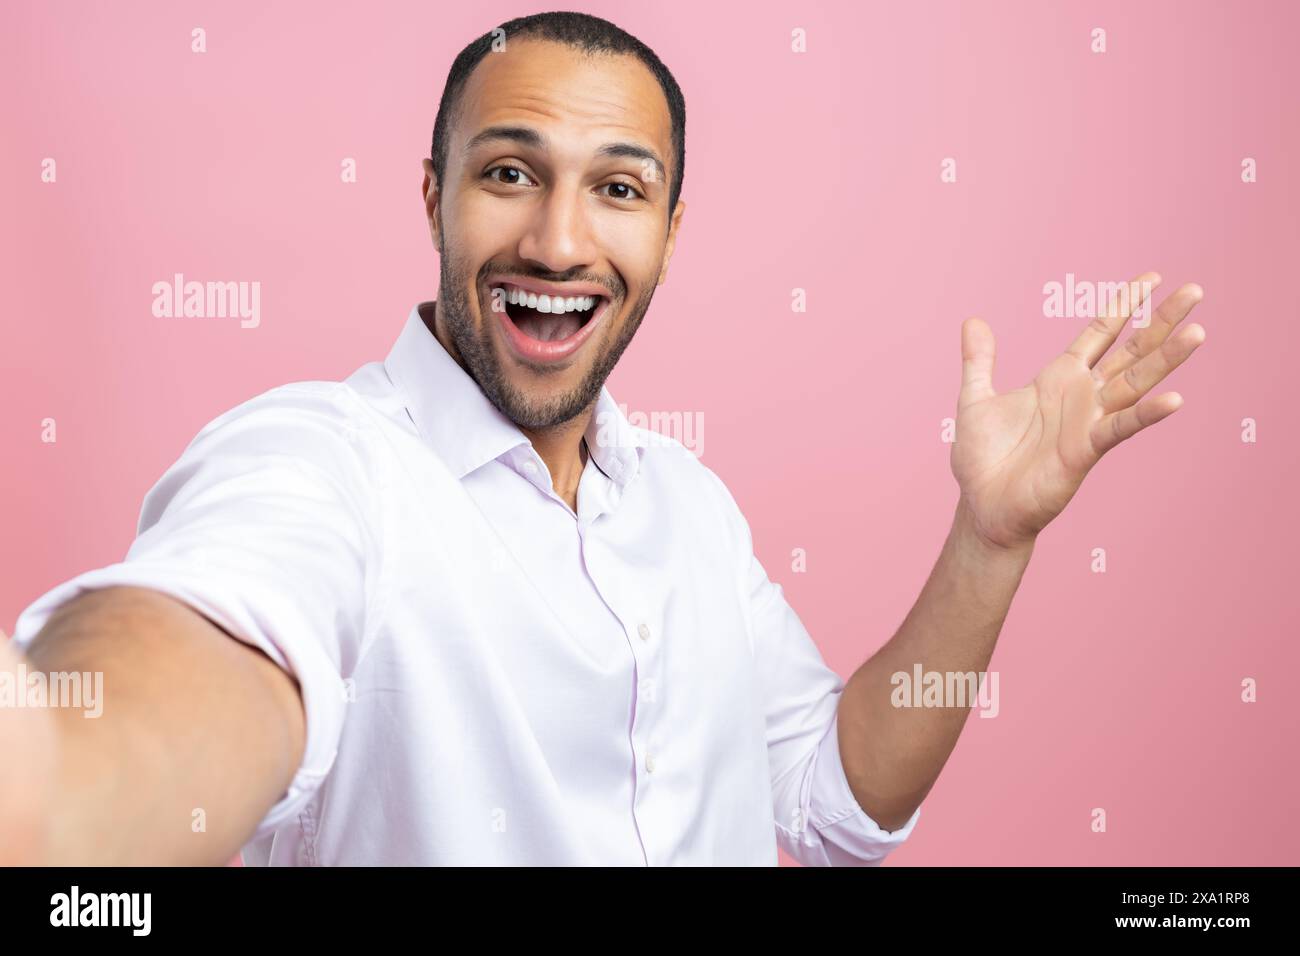 Handsome man in white shirt making point of view photo isolated over pink background Stock Photo